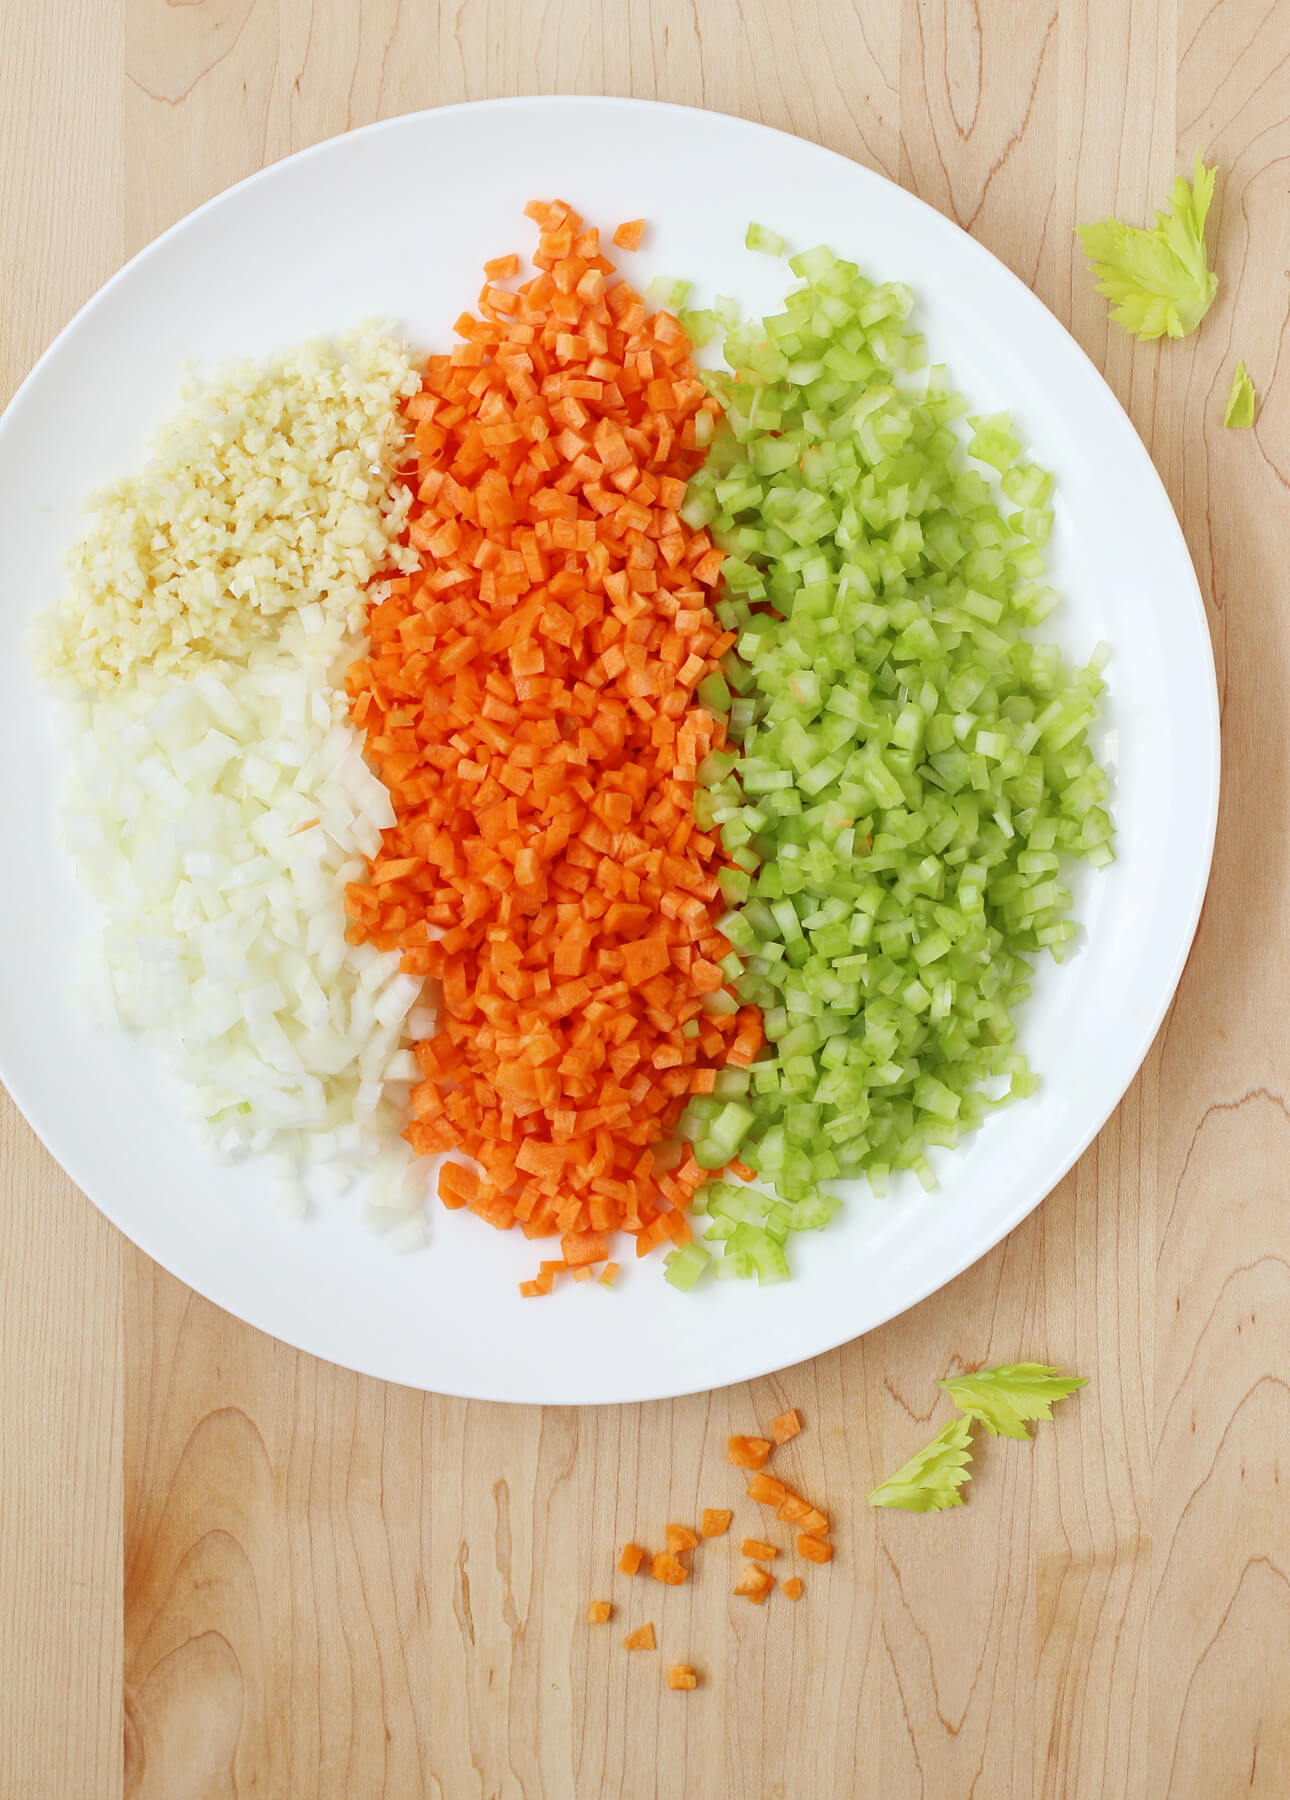 Finely diced vegetables to make Authentic Bolognese Sauce / How to Make an Authentic Bolognese Sauce / FoodNouveau.com